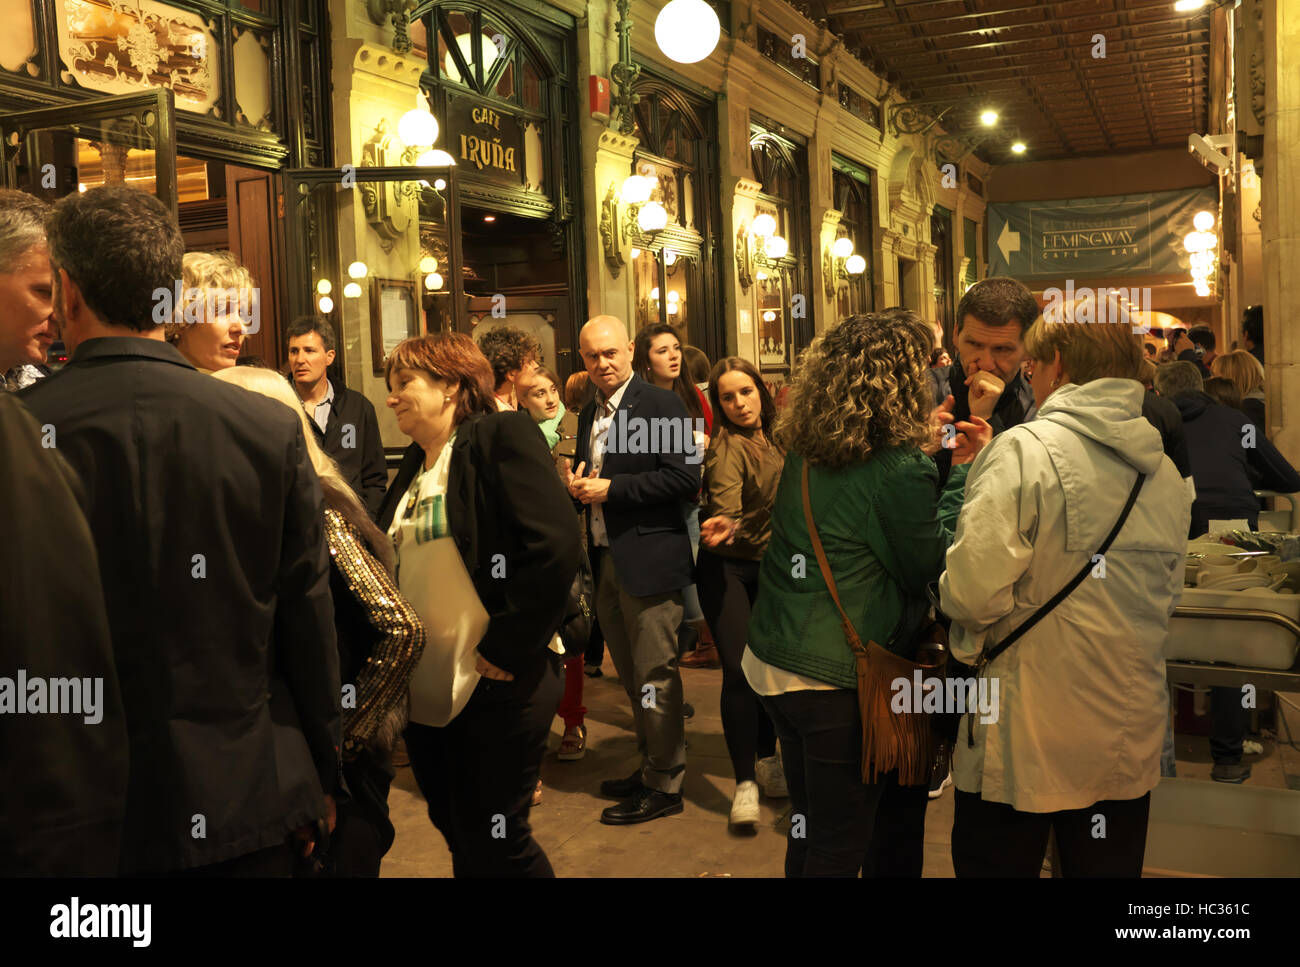 Visitors socialize in the arcade outside Cafe Iruna, the historic cafe in Pamplona, Spain, made famous by Ernest Hemingway in The Sun Also Rises. Stock Photo